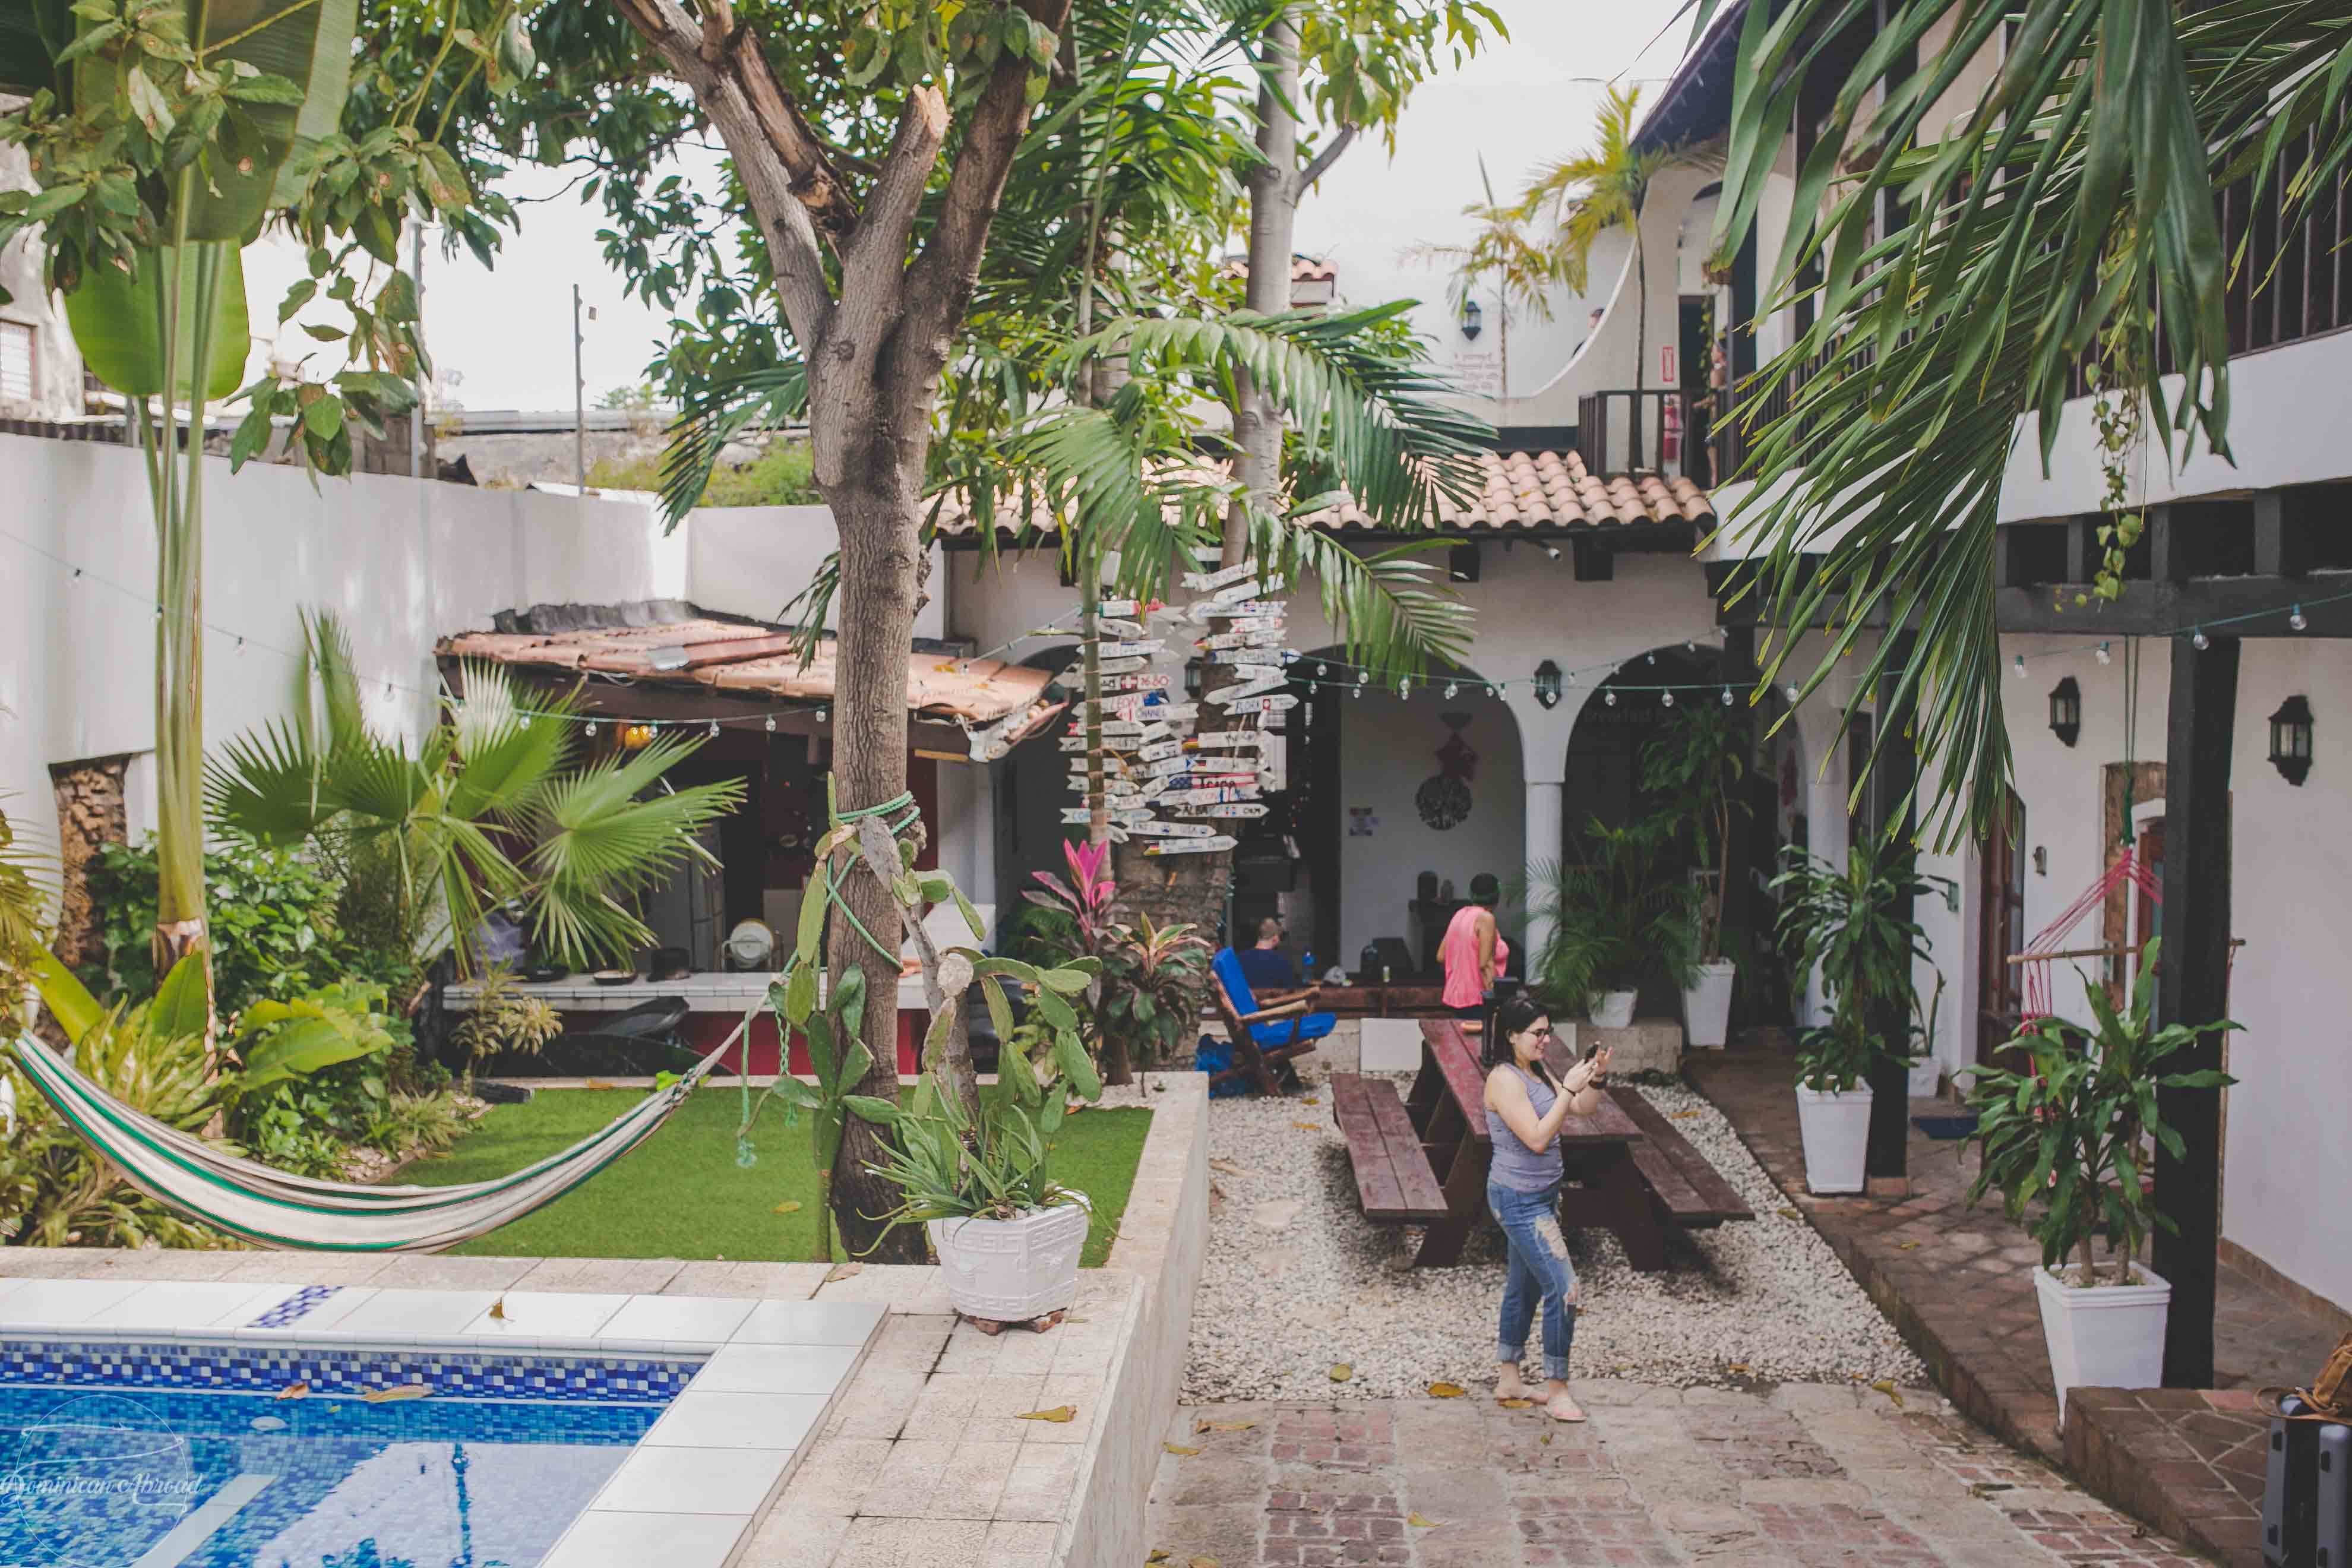 The courtyard of a hostel in Santo Domingo.